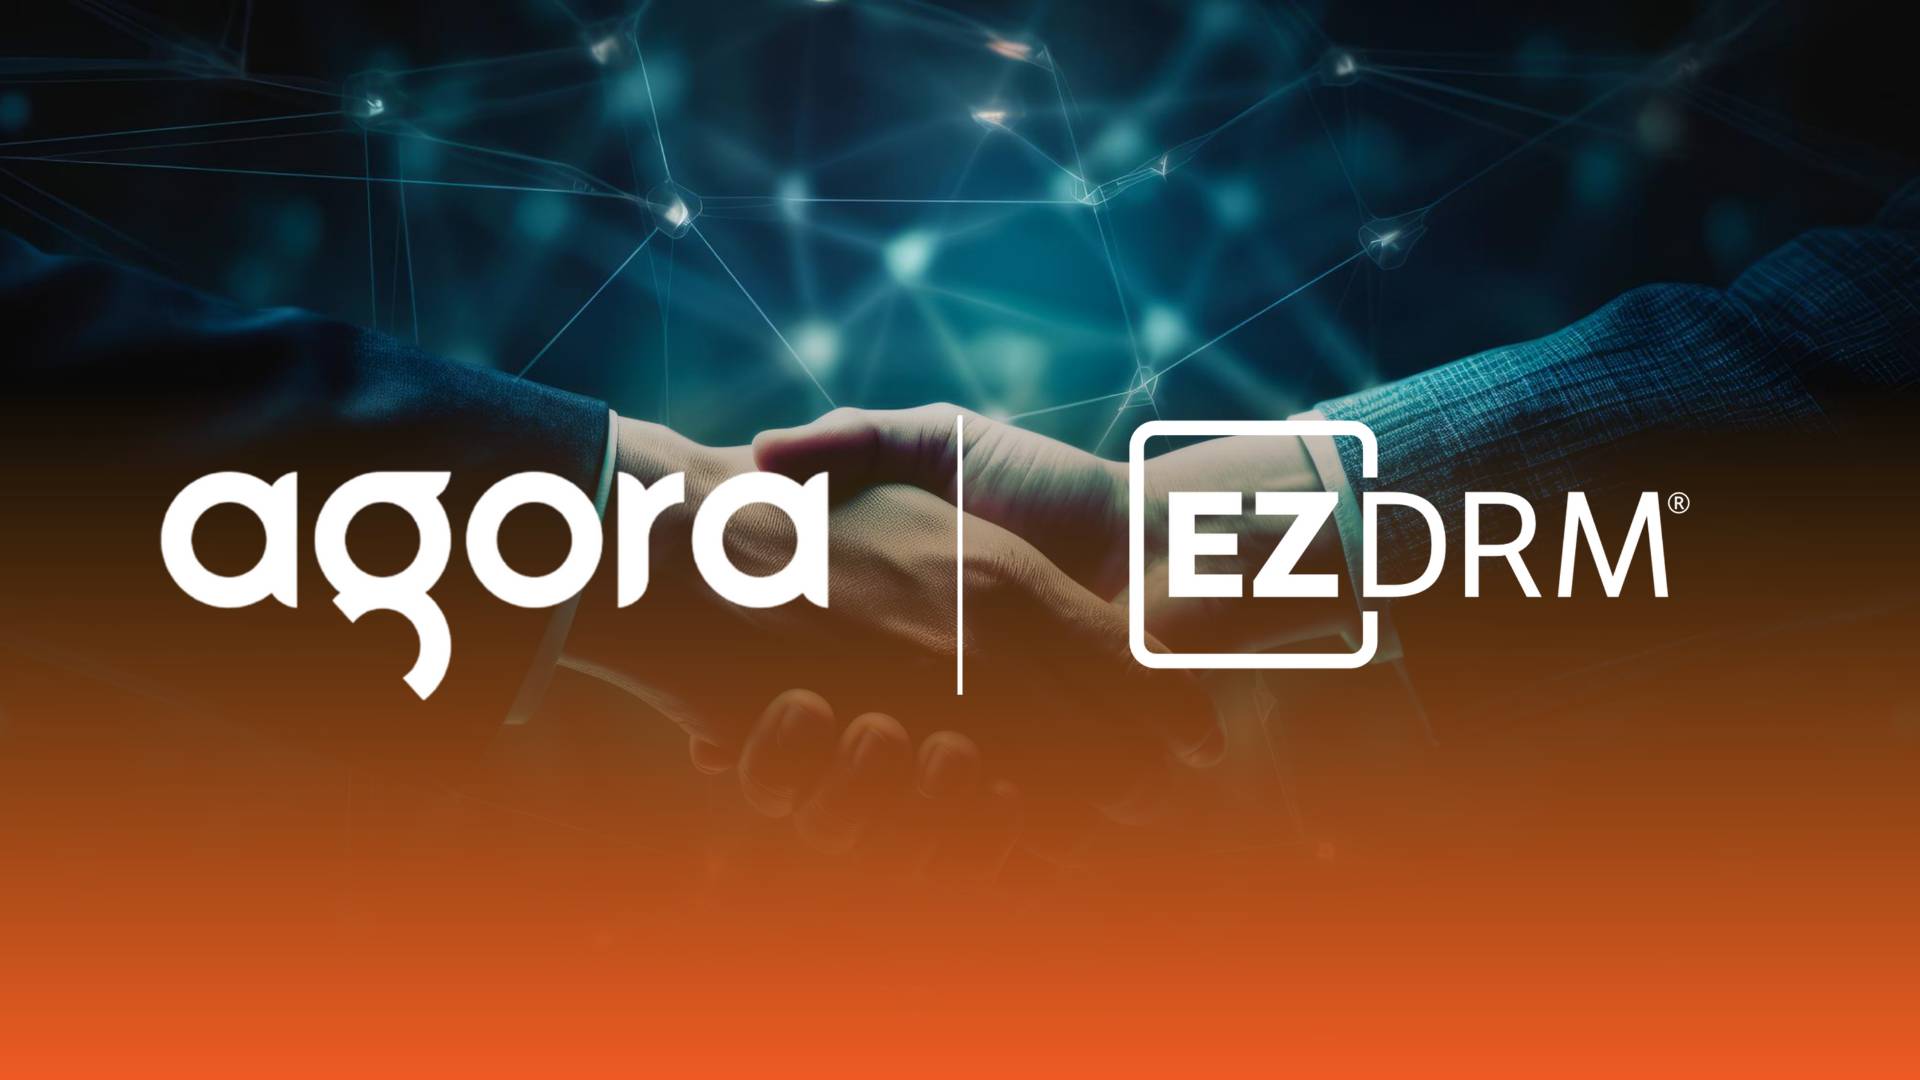 Agora Partners with EZDRM to Enhance Real-Time Engagement with Secure Content Protection